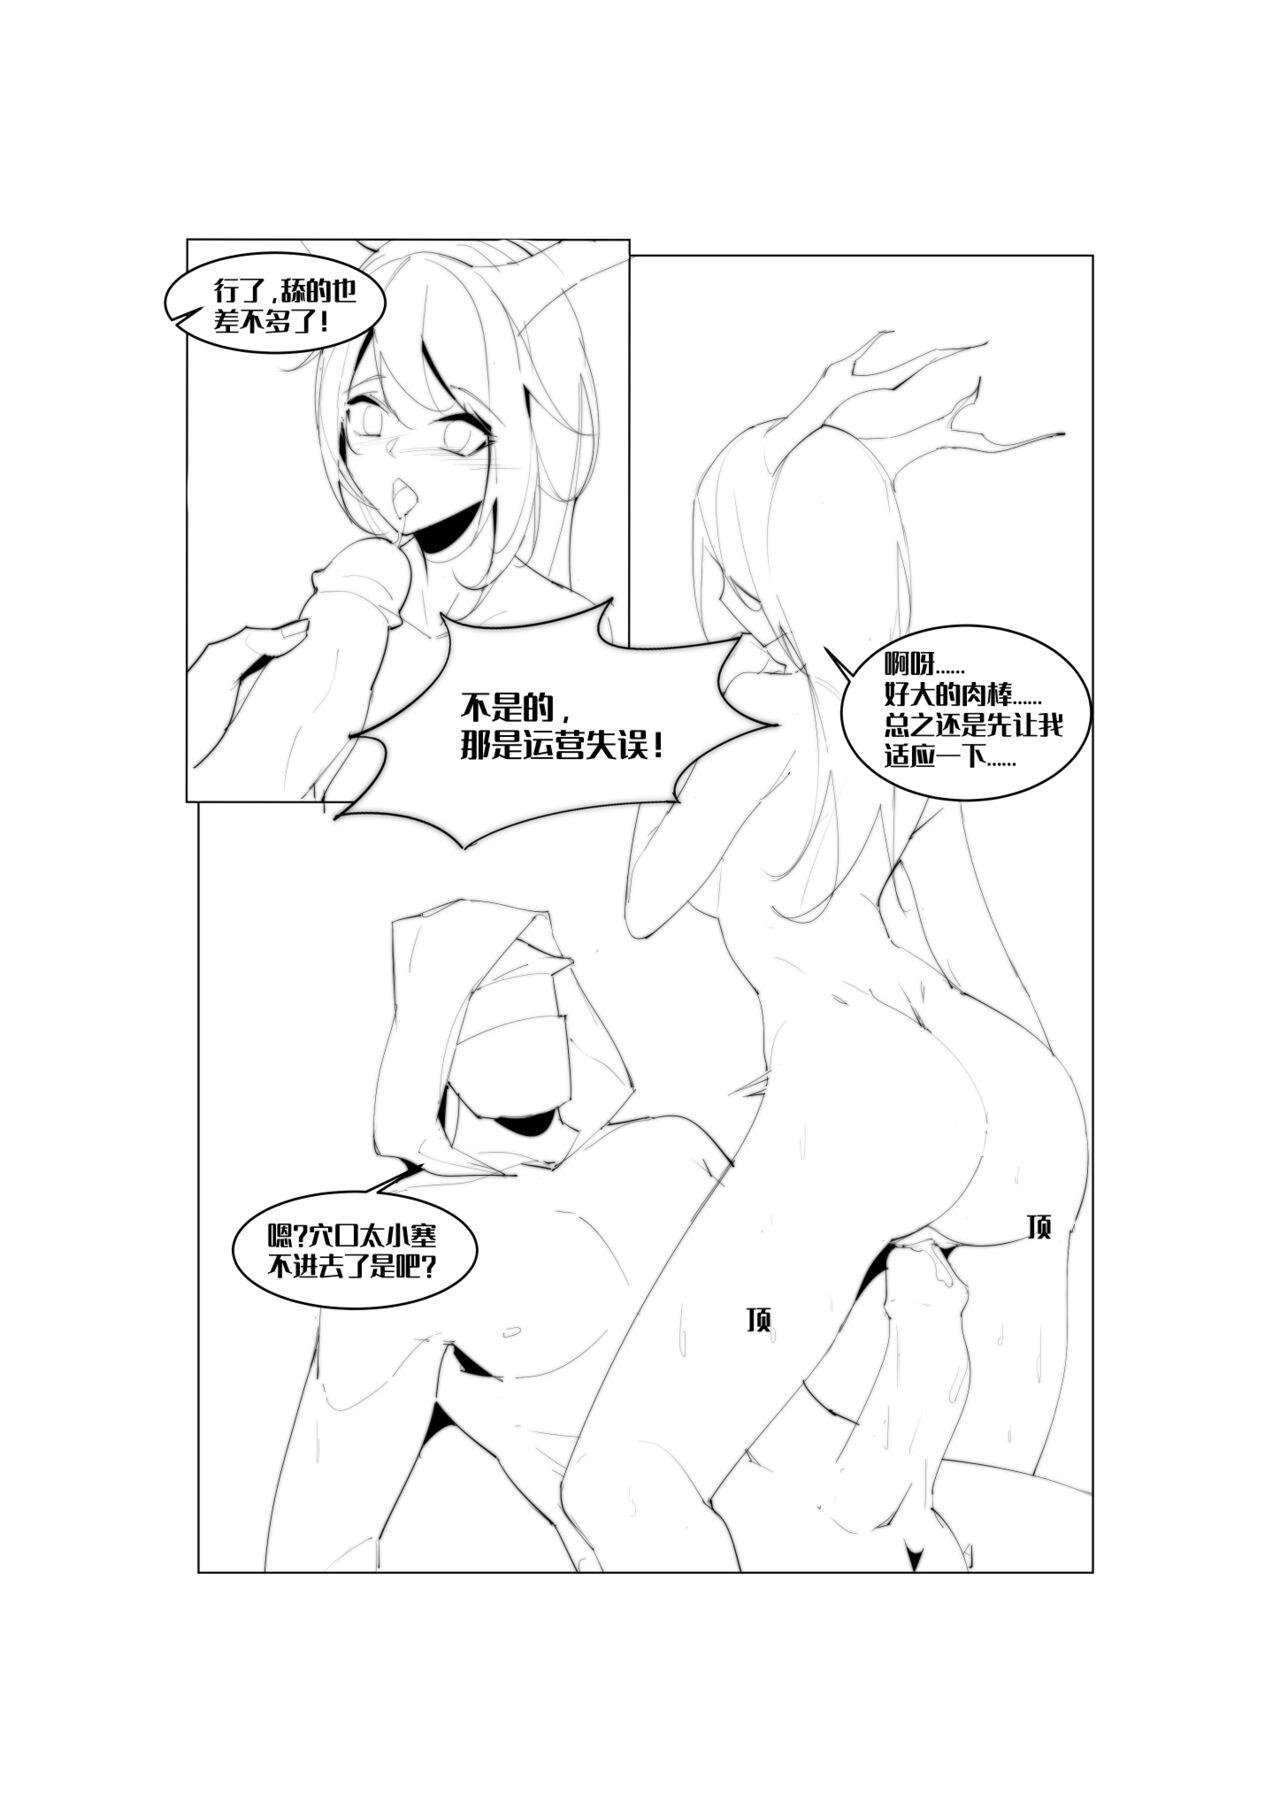 Shower 【playerZ最弱玩家】笨笨鹰角（Arknights） - Arknights Freckles - Picture 3